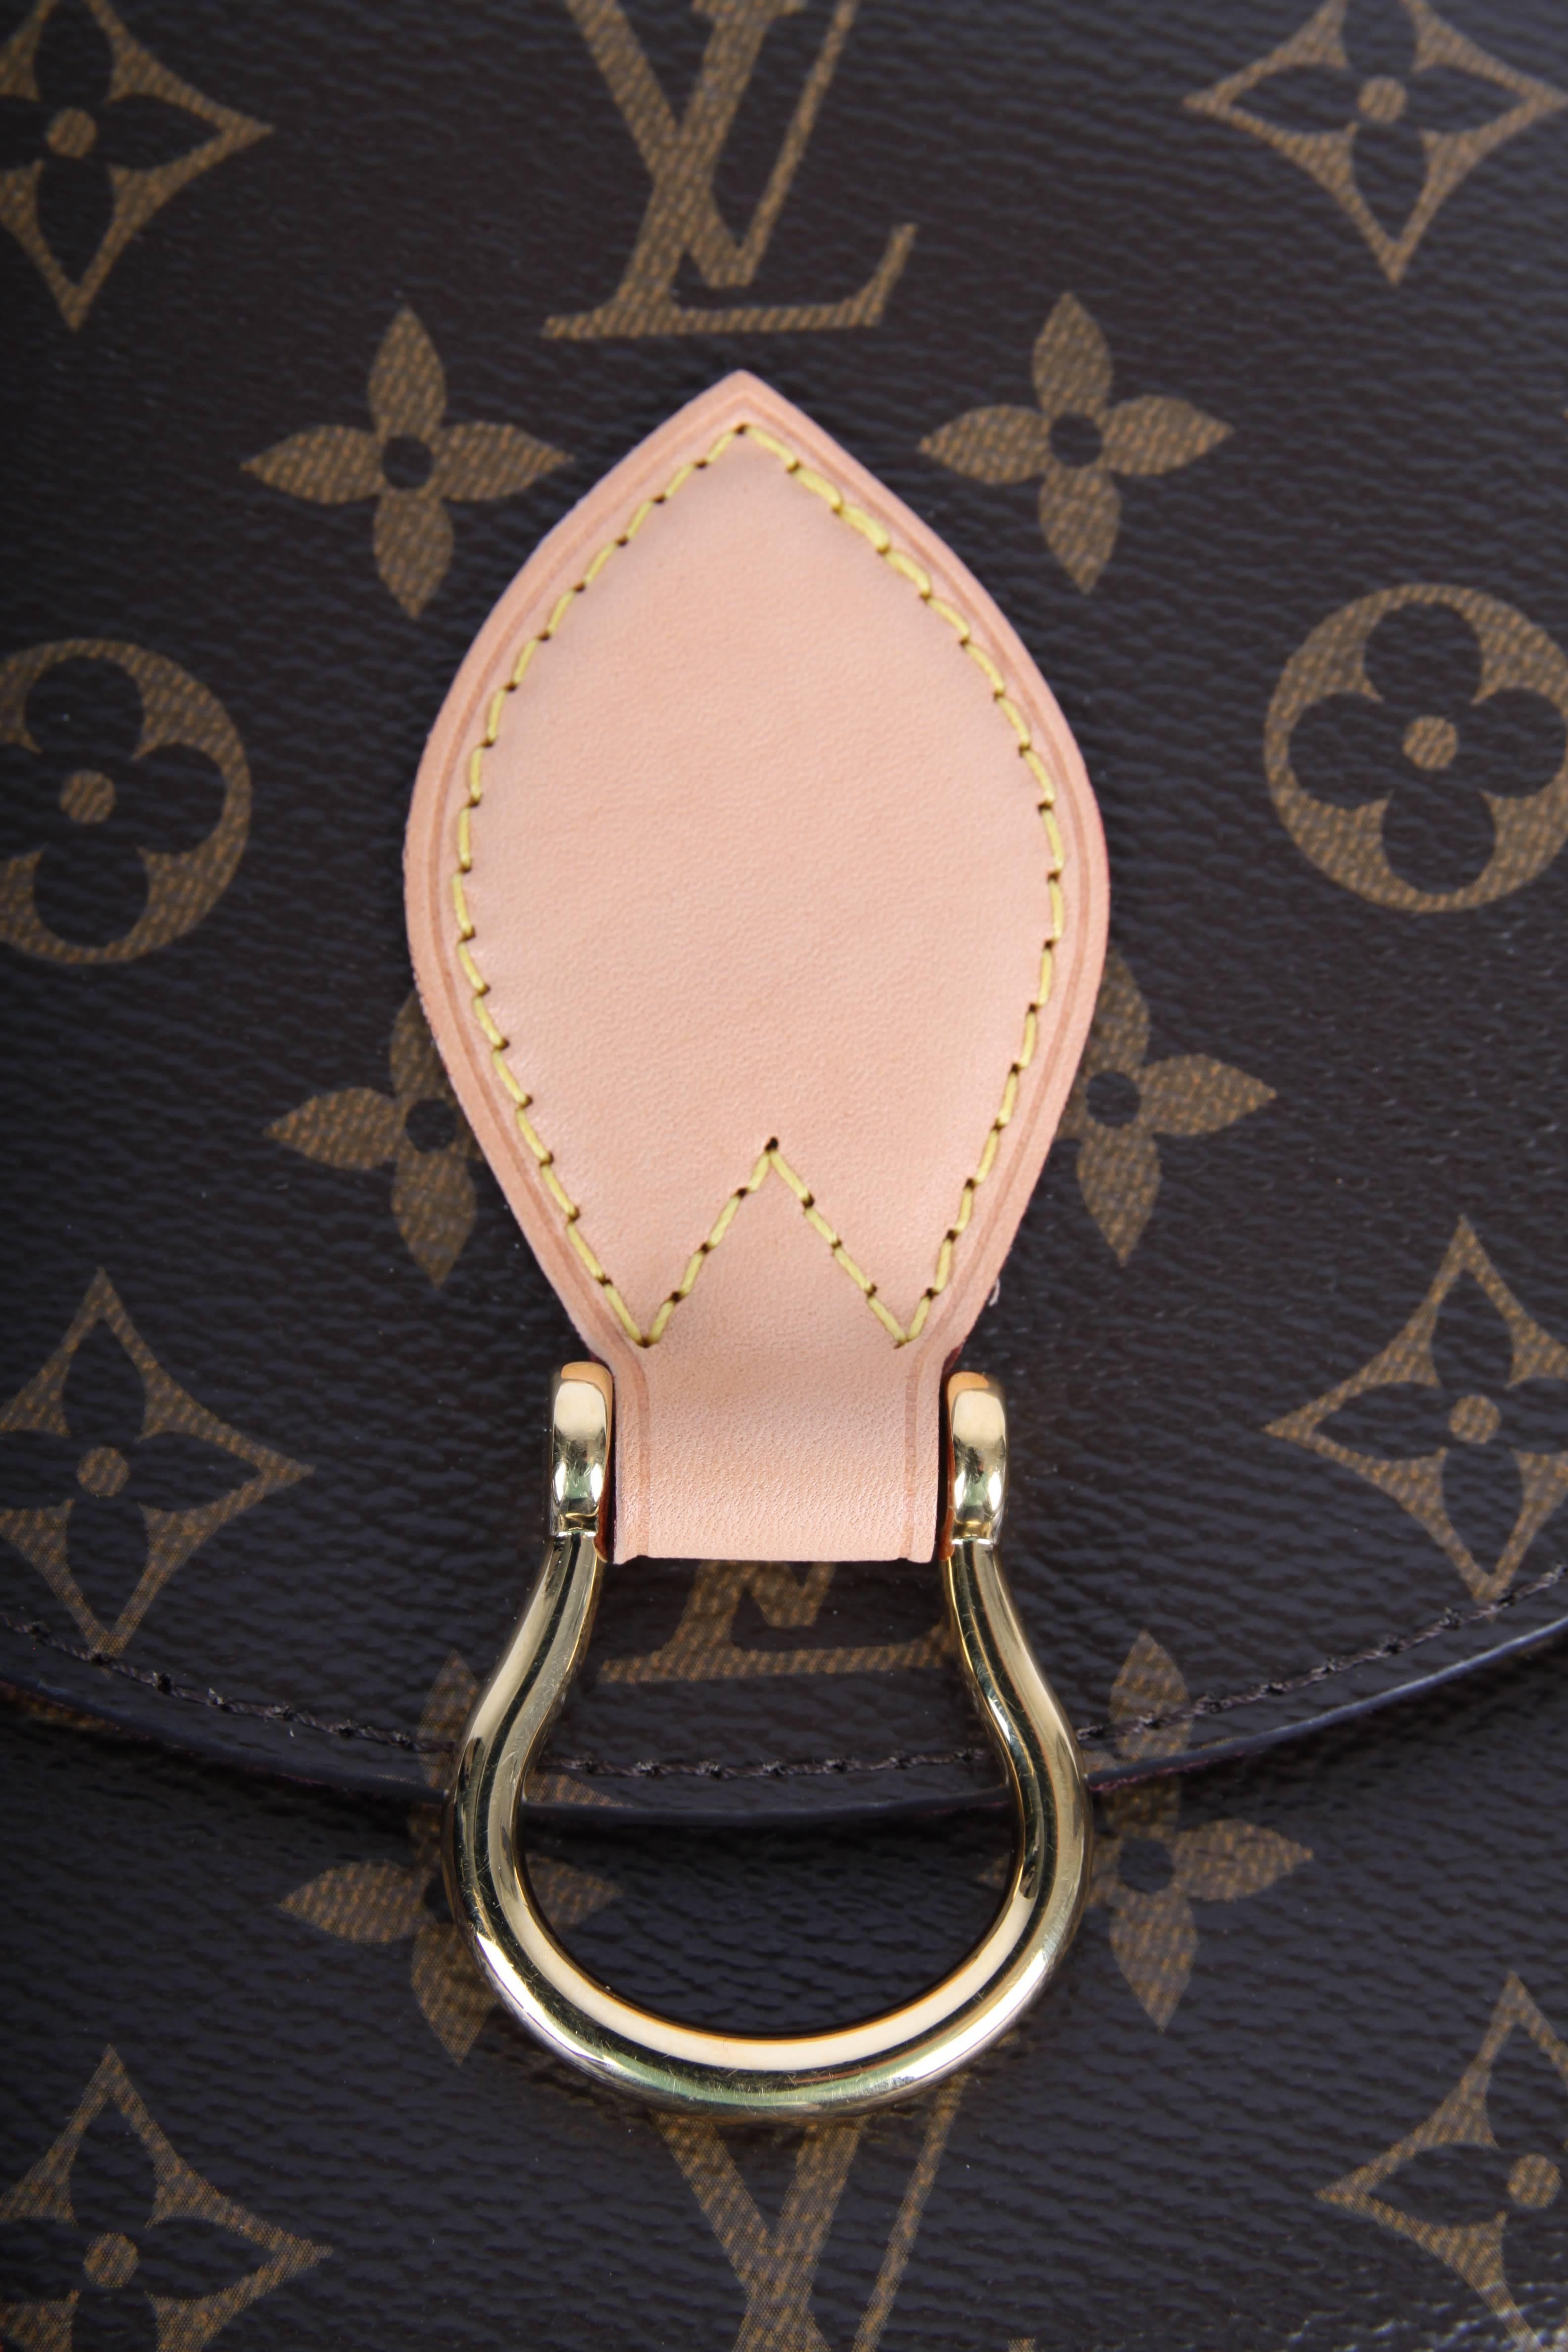 Stylish shoulder bag by Louis Vuitton, which also can be worn cross over. This is the Saint Cloud Bag.

Of course crafted from the welknown dark brown canvas covered with LV monograms. Garnished with natural-tone leather and gold-tone mini studs. A